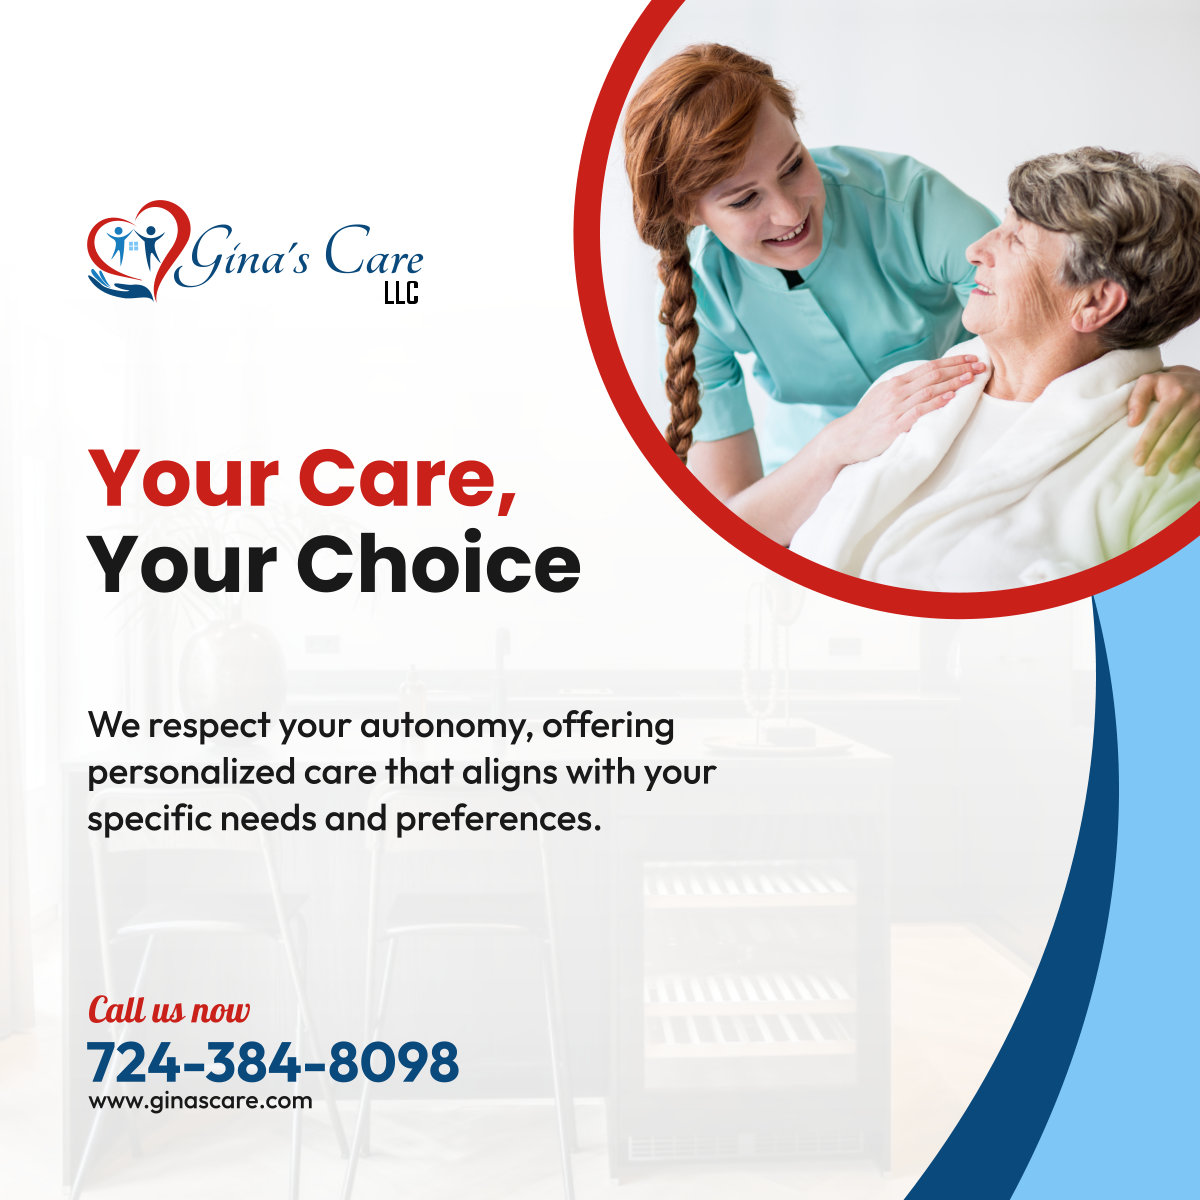 Choose the care that fits your life. Our personalized approach ensures you receive respectful and competent service suited just for you. Reach out to us now!

#NewBrightonPA #HomeCare #PersonalizedCare